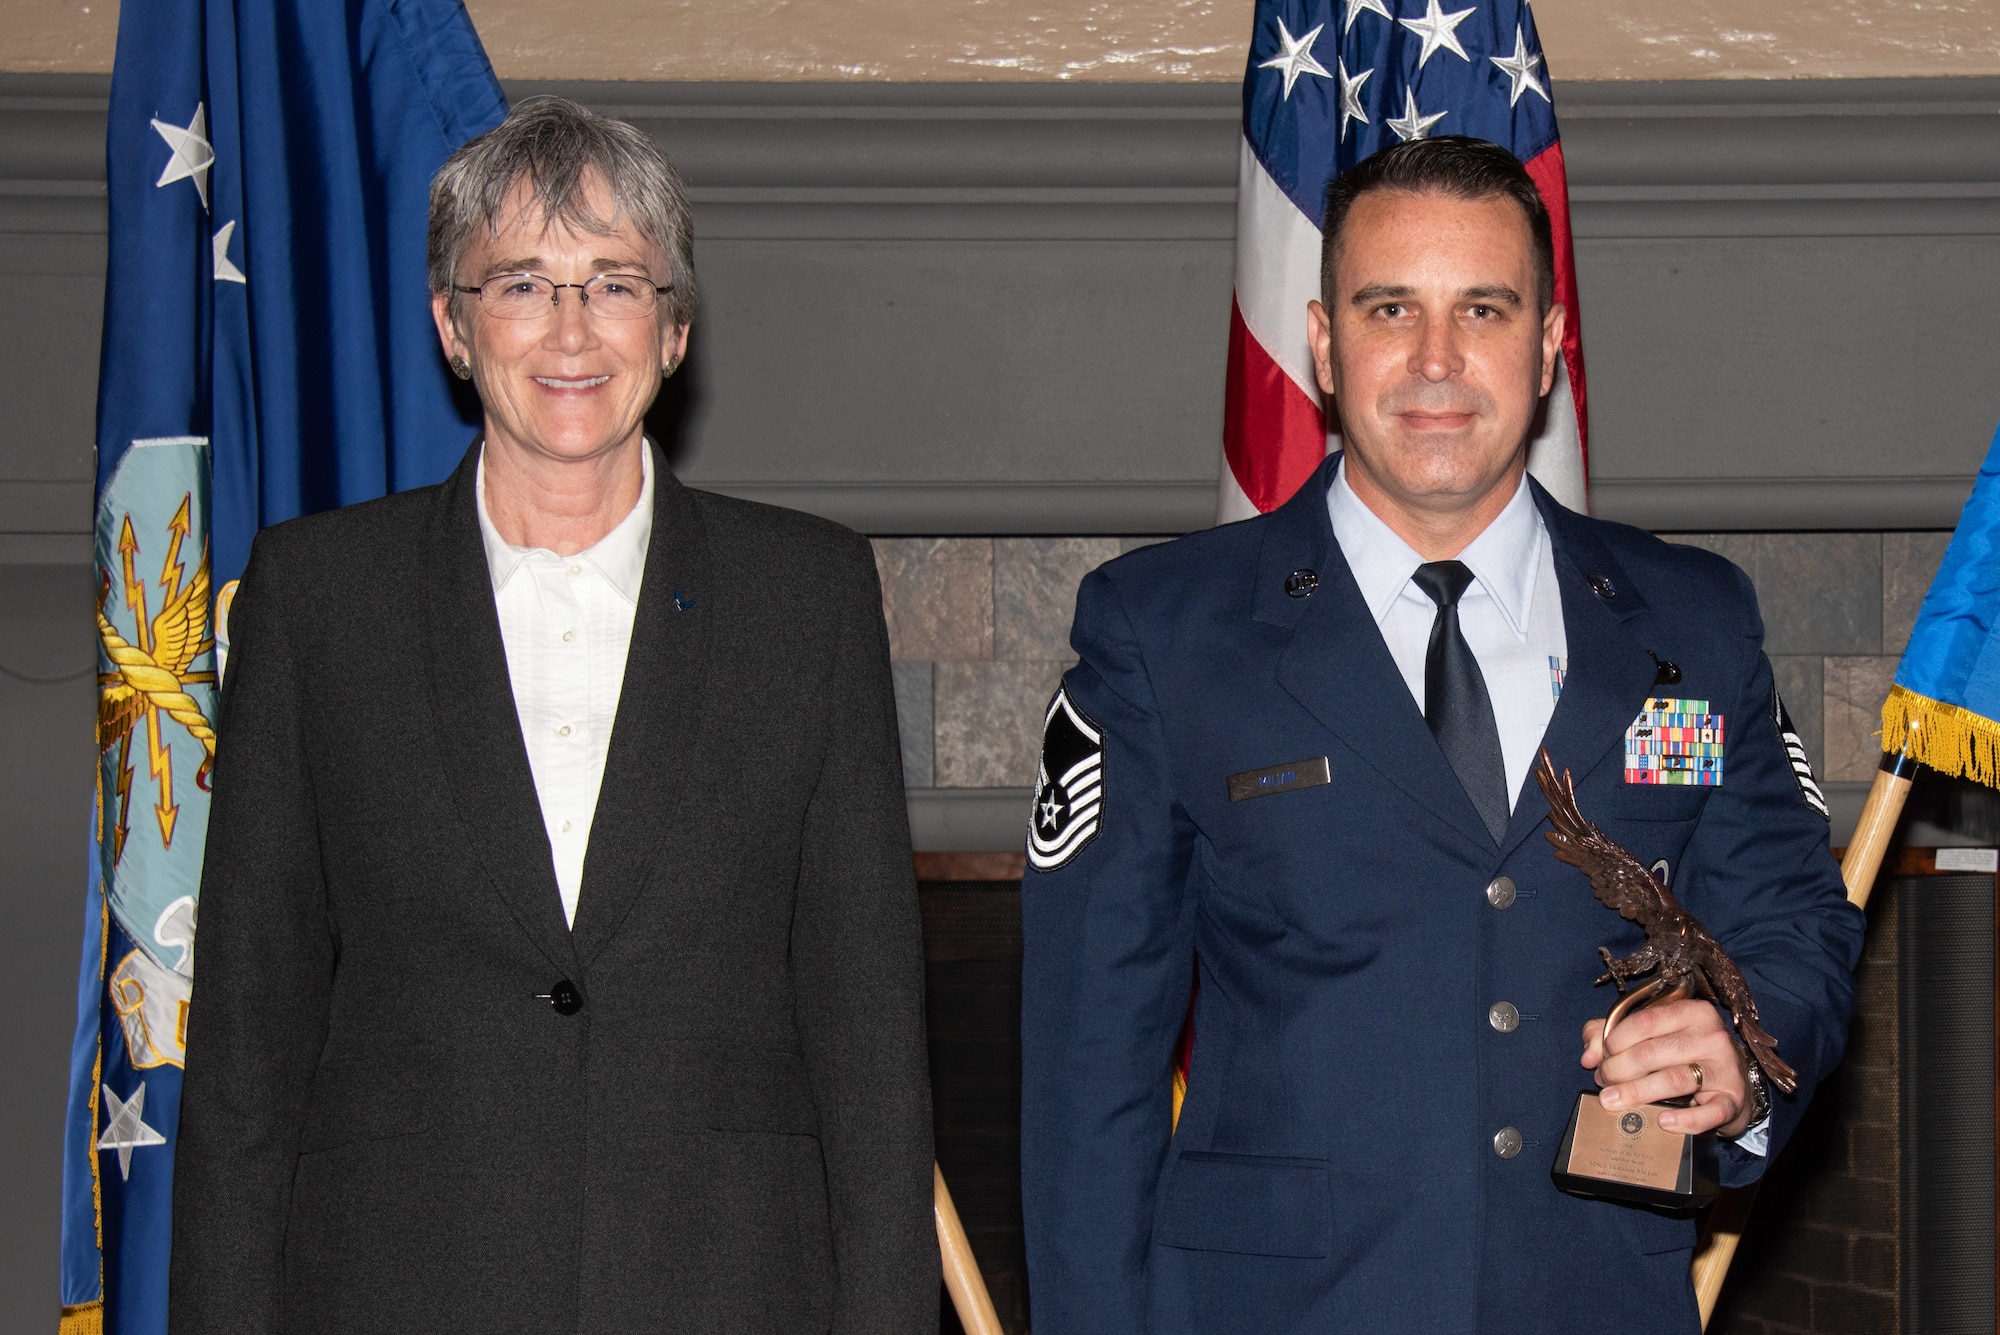 Secretary of the Air Force Heather Wilson, left, presents Master Sgt. Roldan Milian, Officer Training School military training instructor superintendent, right, with the 2019 Secretary of the Air Force Leadership Award May 14, 2019, at Maxwell Air Force Base, Alabama. Milian led a ten-person MTI corps, supporting the training and commissioning of 3,400 new officers, totaling 54 percent of the Air Force’s officer accessions. He also earned the flight room evaluator certification typically reserved for the officer corps, supporting 240 officer and enlisted evaluations for staff. Additionally, he worked with the Air University commander to fill a critical resource gap, accelerating the arrival of all future MTIs to duty at OTS by 90 days. His efforts earned him the Holm Center’s Senior Non-Commissioned Officer of the Year and the 2018 Lance P. Sijan nomination to AU.